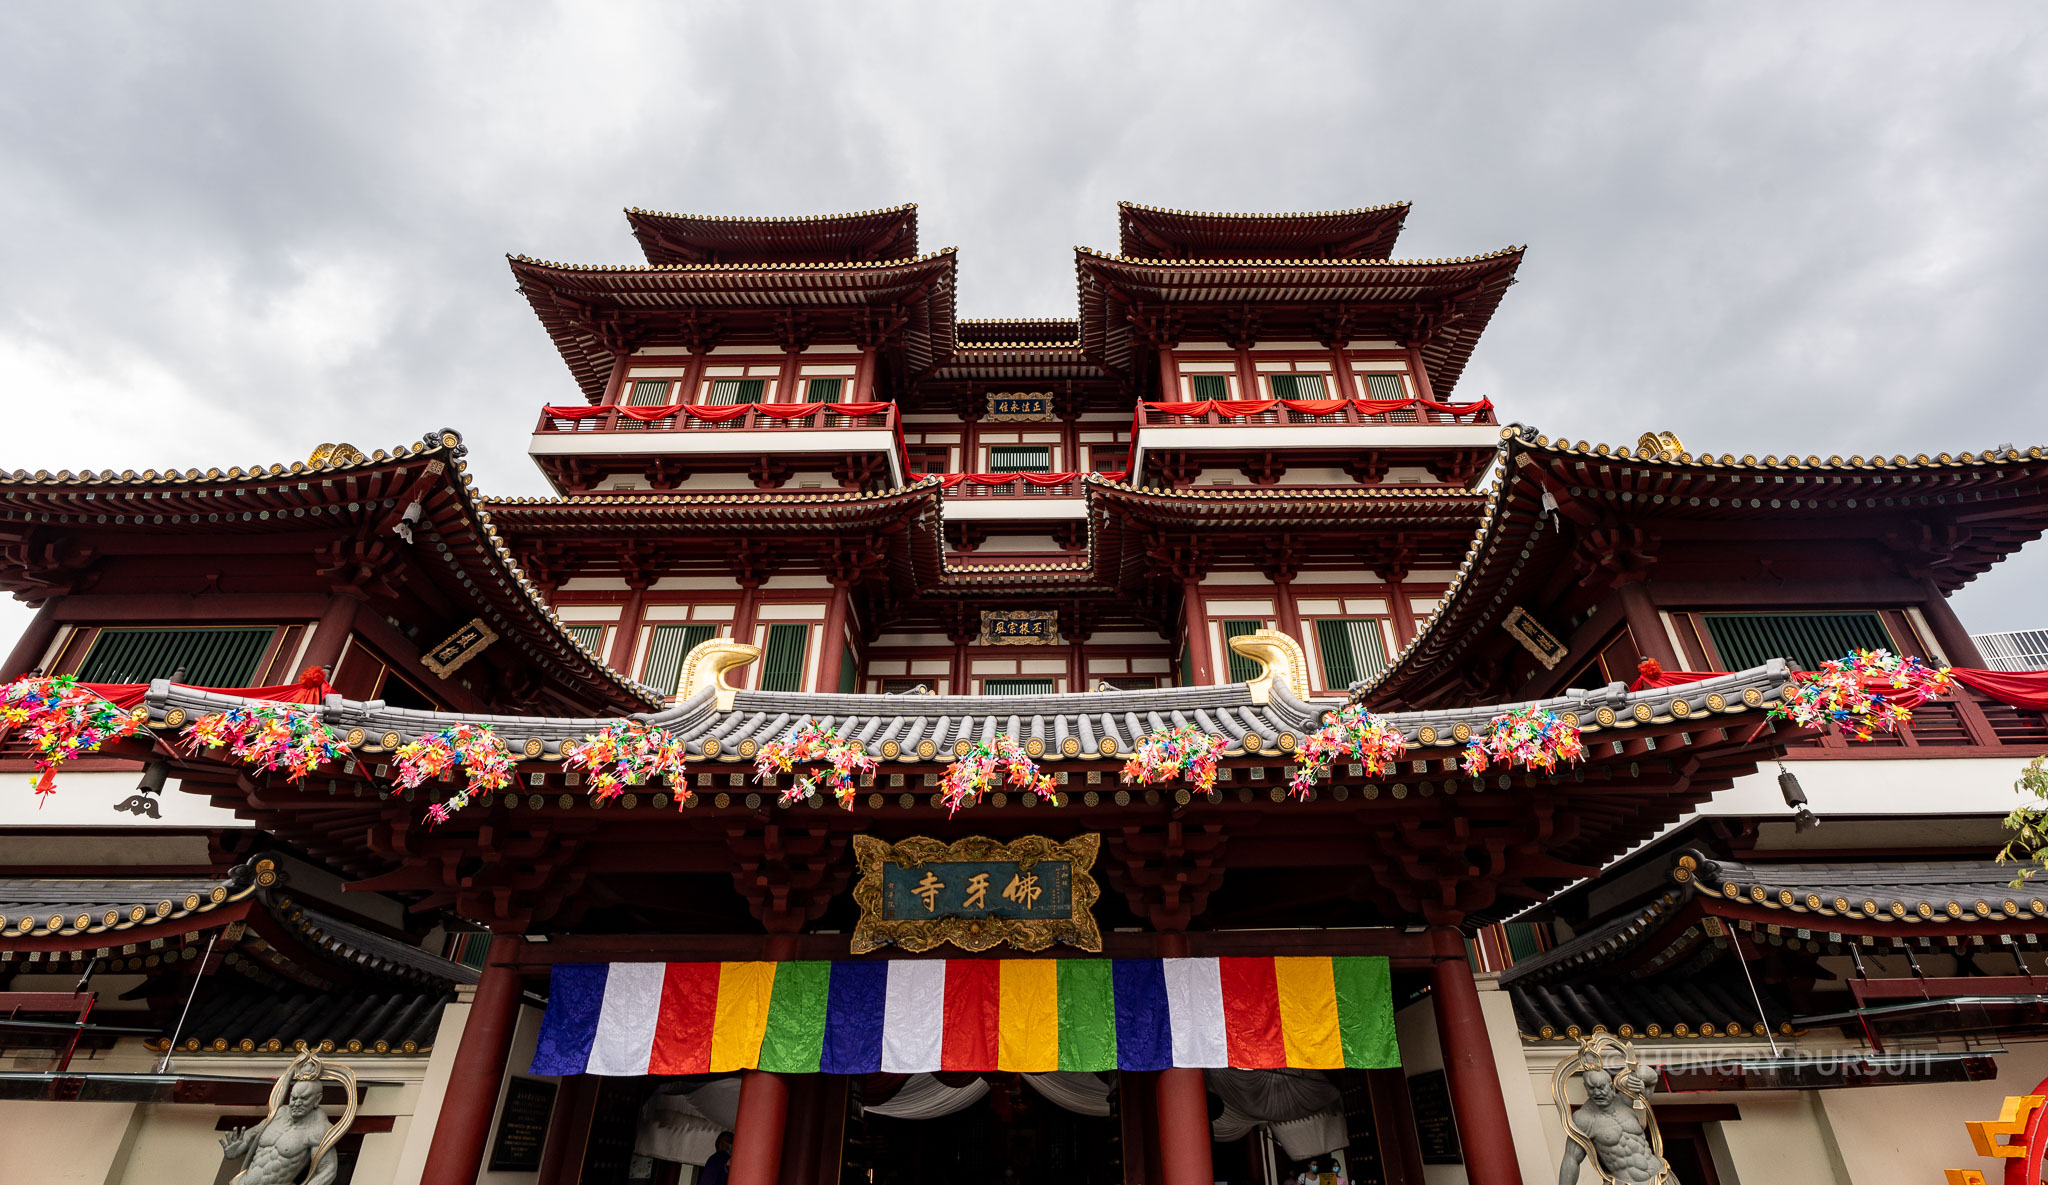 Exterior view of Buddha Tooth Relic Temple, a renowned Buddhist temple in Singapore.